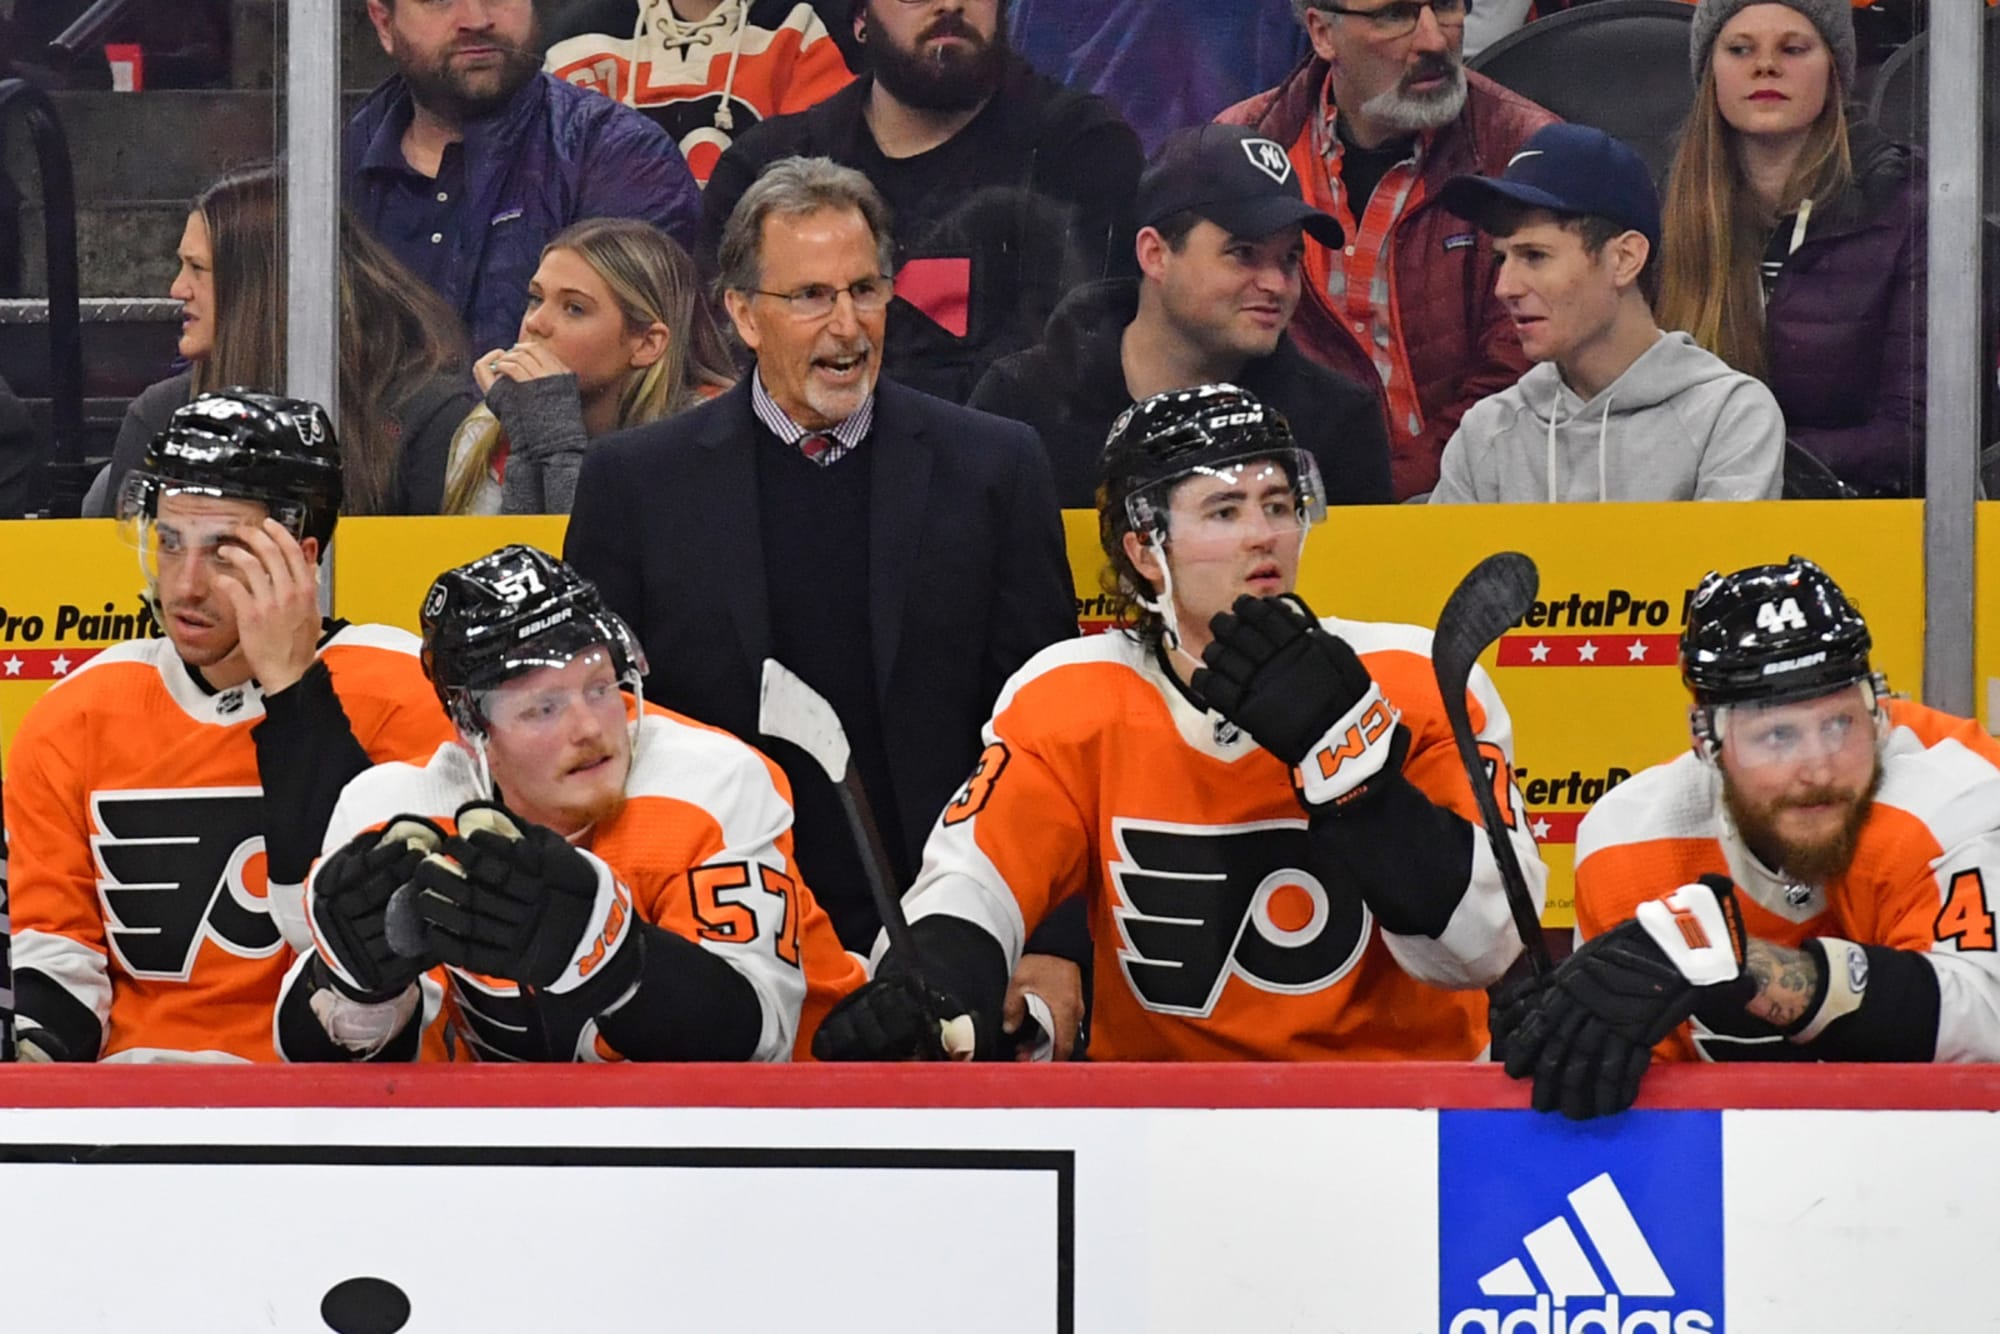 Flyers prepare for rebuild while other Philly teams thrive